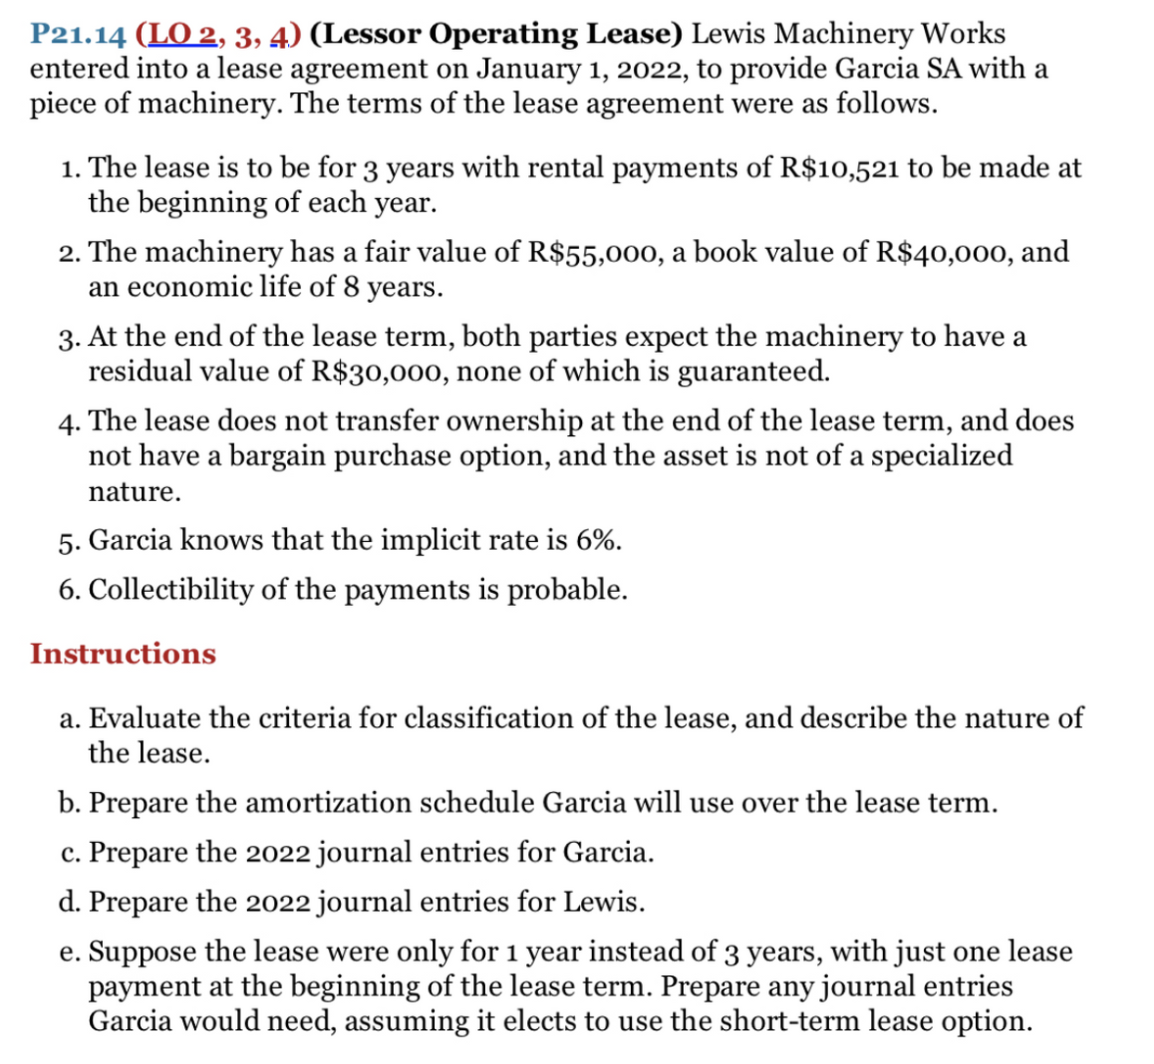 P21.14 (LO 2, 3, 4) (Lessor Operating Lease) Lewis Machinery Works
entered into a lease agreement on January 1, 2022, to provide Garcia SA with a
piece of machinery. The terms of the lease agreement were as follows.
1. The lease is to be for 3 years with rental payments of R$10,521 to be made at
the beginning of each year.
2. The machinery has a fair value of R$55,000, a book value of R$40,000, and
an economic life of 8 years.
3. At the end of the lease term, both parties expect the machinery to have a
residual value of R$30,000, none of which is guaranteed.
4. The lease does not transfer ownership at the end of the lease term, and does
not have a bargain purchase option, and the asset is not of a specialized
nature.
5. Garcia knows that the implicit rate is 6%.
6. Collectibility of the payments is probable.
Instructions
a. Evaluate the criteria for classification of the lease, and describe the nature of
the lease.
b. Prepare the amortization schedule Garcia will use over the lease term.
c. Prepare the 2022 journal entries for Garcia.
d. Prepare the 2022 journal entries for Lewis.
e. Suppose the lease were only for 1 year instead of 3 years, with just one lease
payment at the beginning of the lease term. Prepare any journal entries
Garcia would need, assuming it elects to use the short-term lease option.
